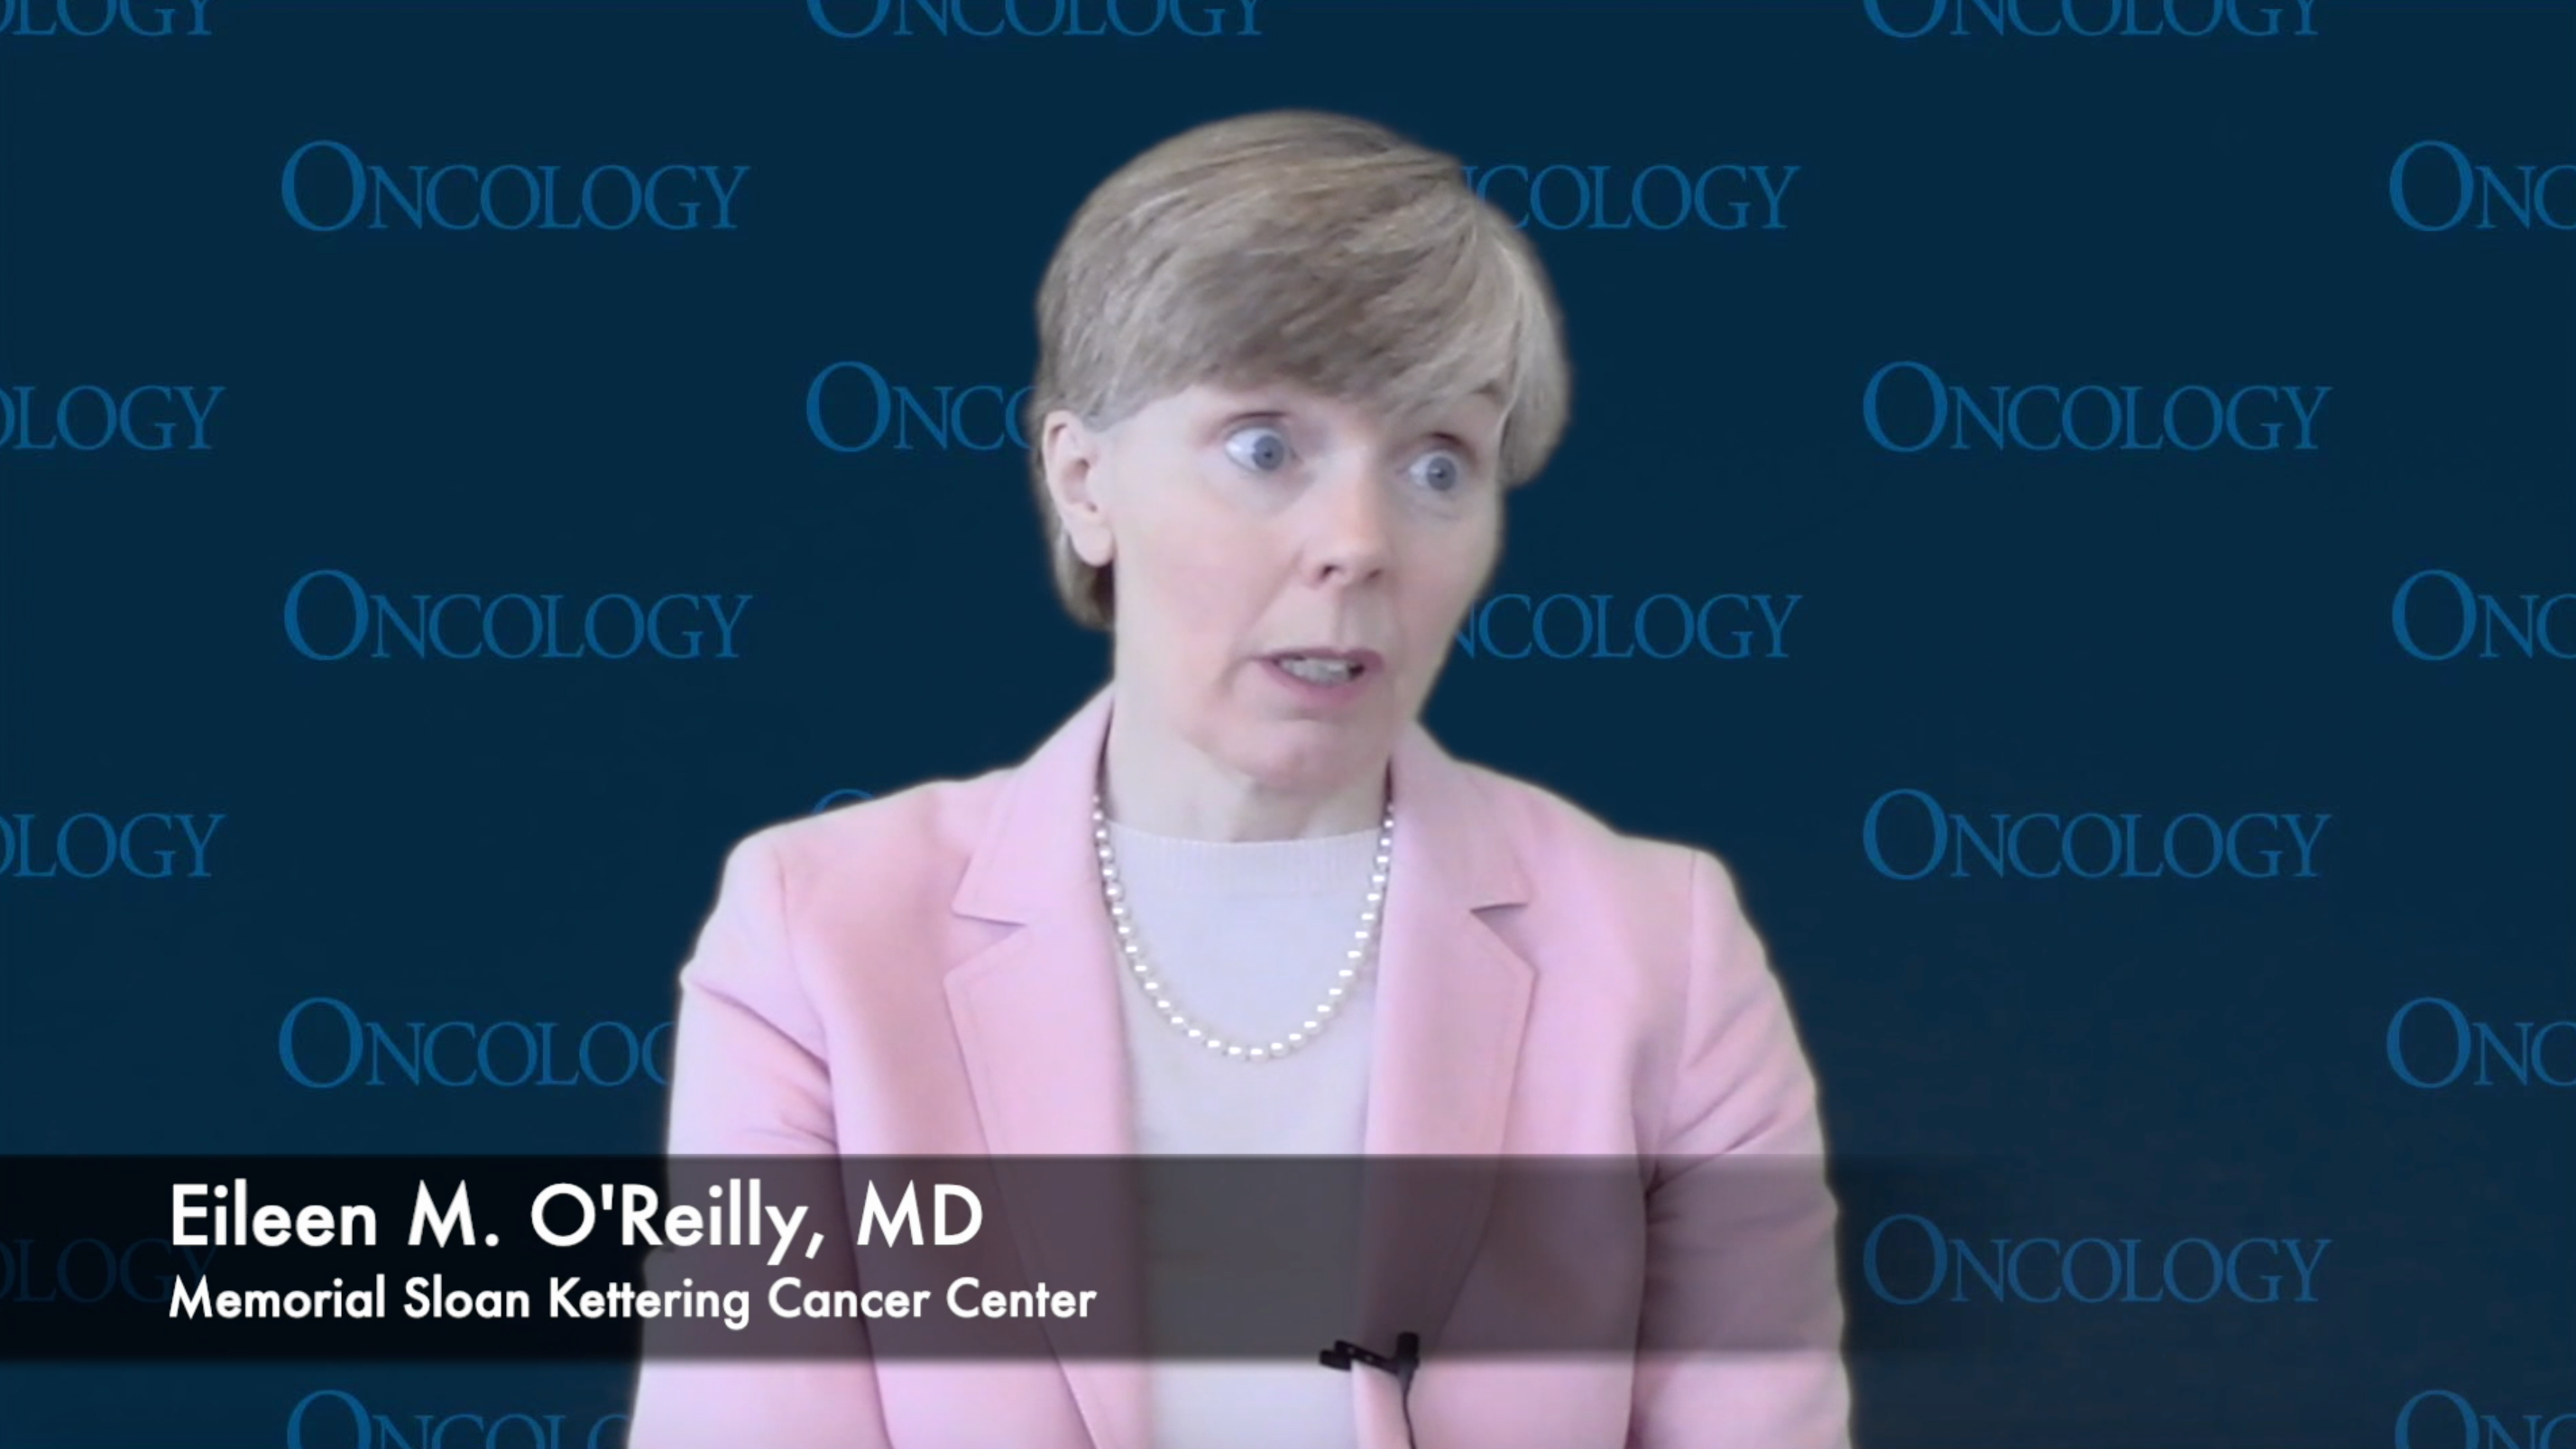 Eileen M. O’Reilly, MD, on the Challenges of Treating Patients with Pancreatic Cancer